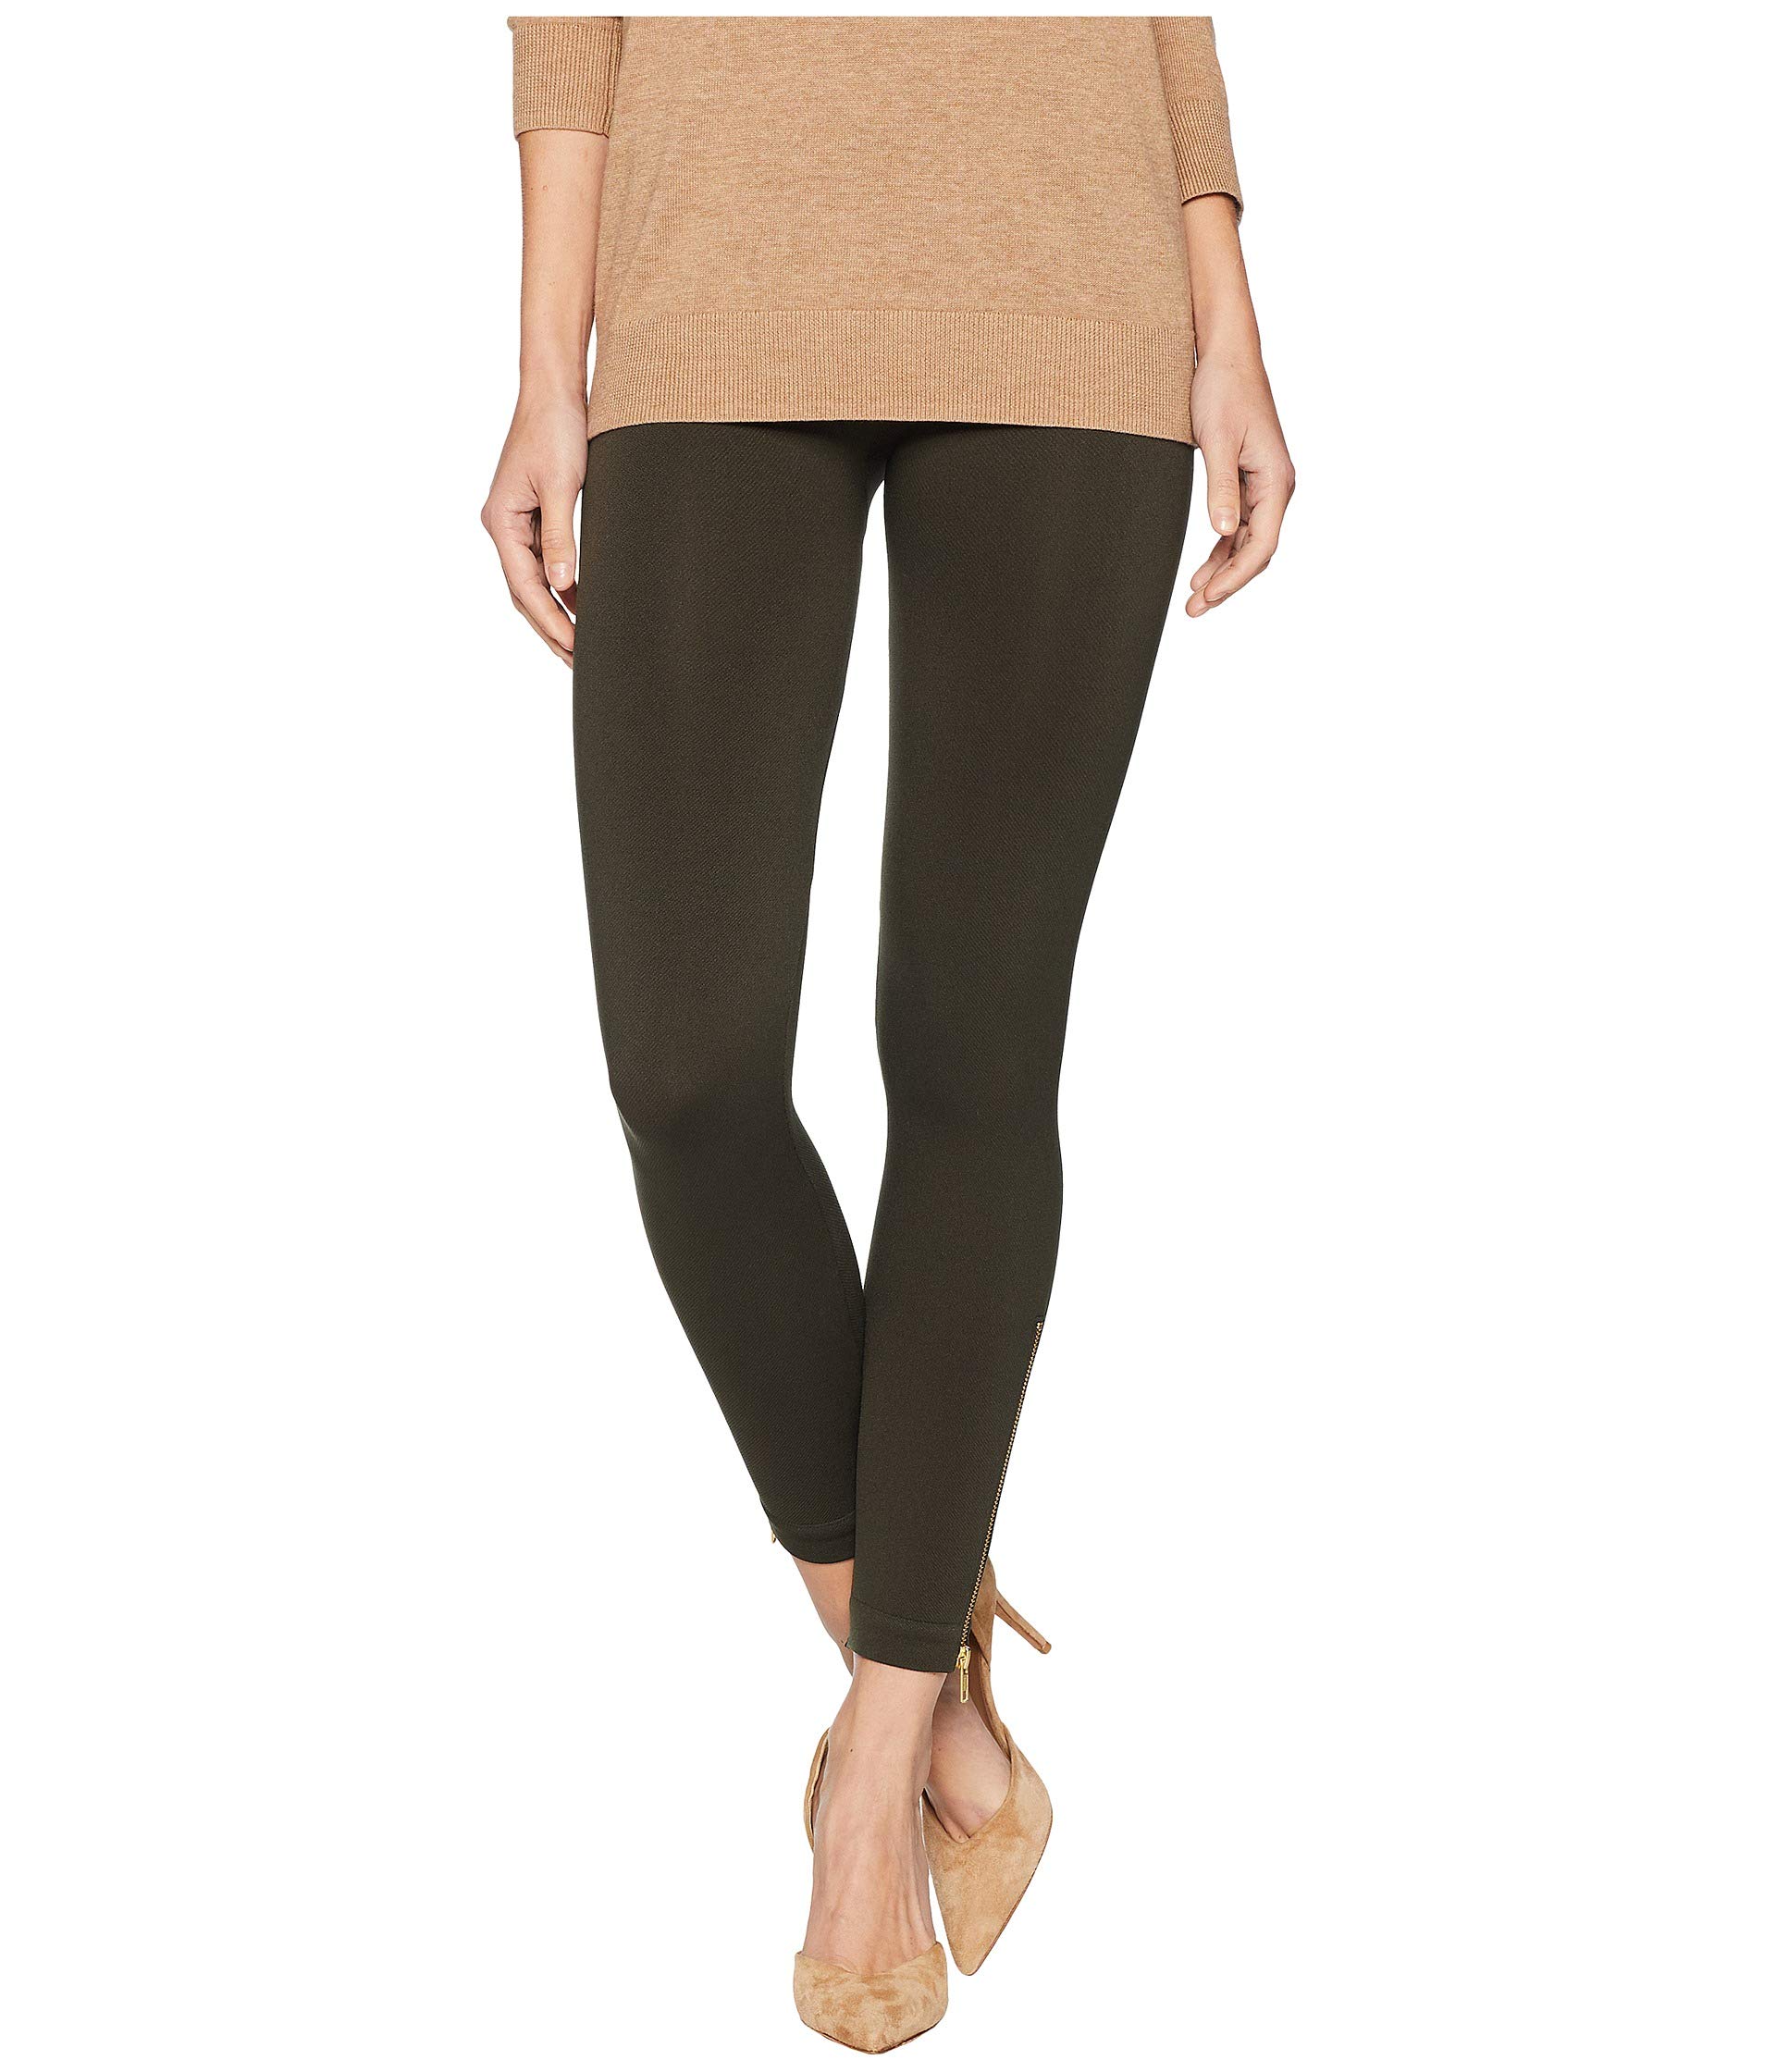 Spanx faux leather leggings: These cult-loved bottoms are on sale